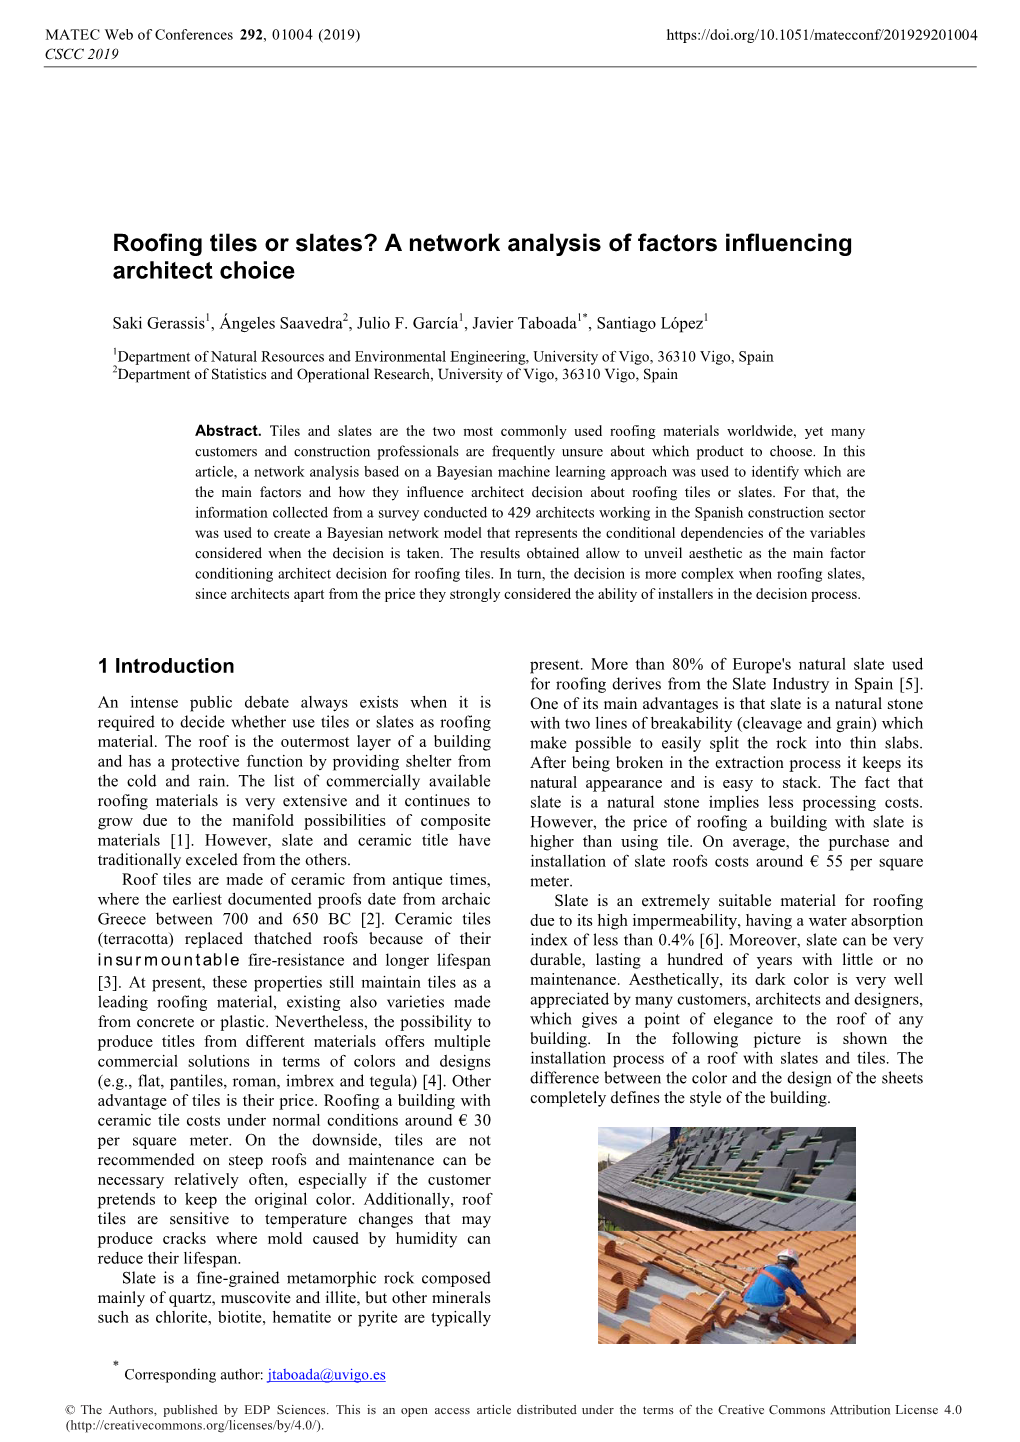 Roofing Tiles Or Slates? a Network Analysis of Factors Influencing Architect Choice